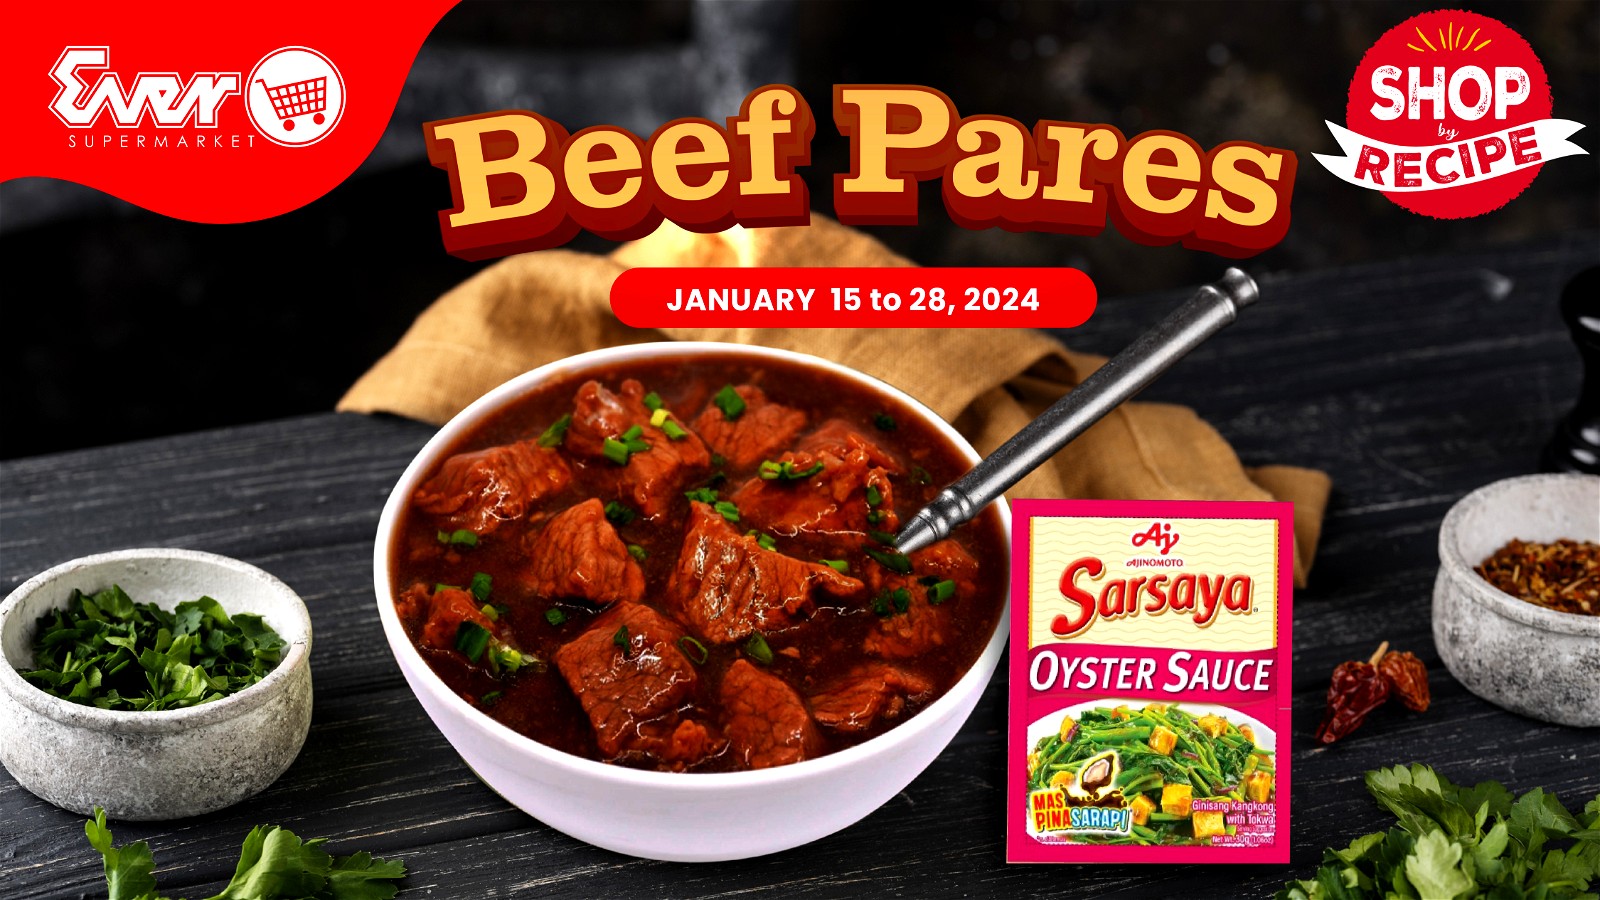 Image of Beef Pares